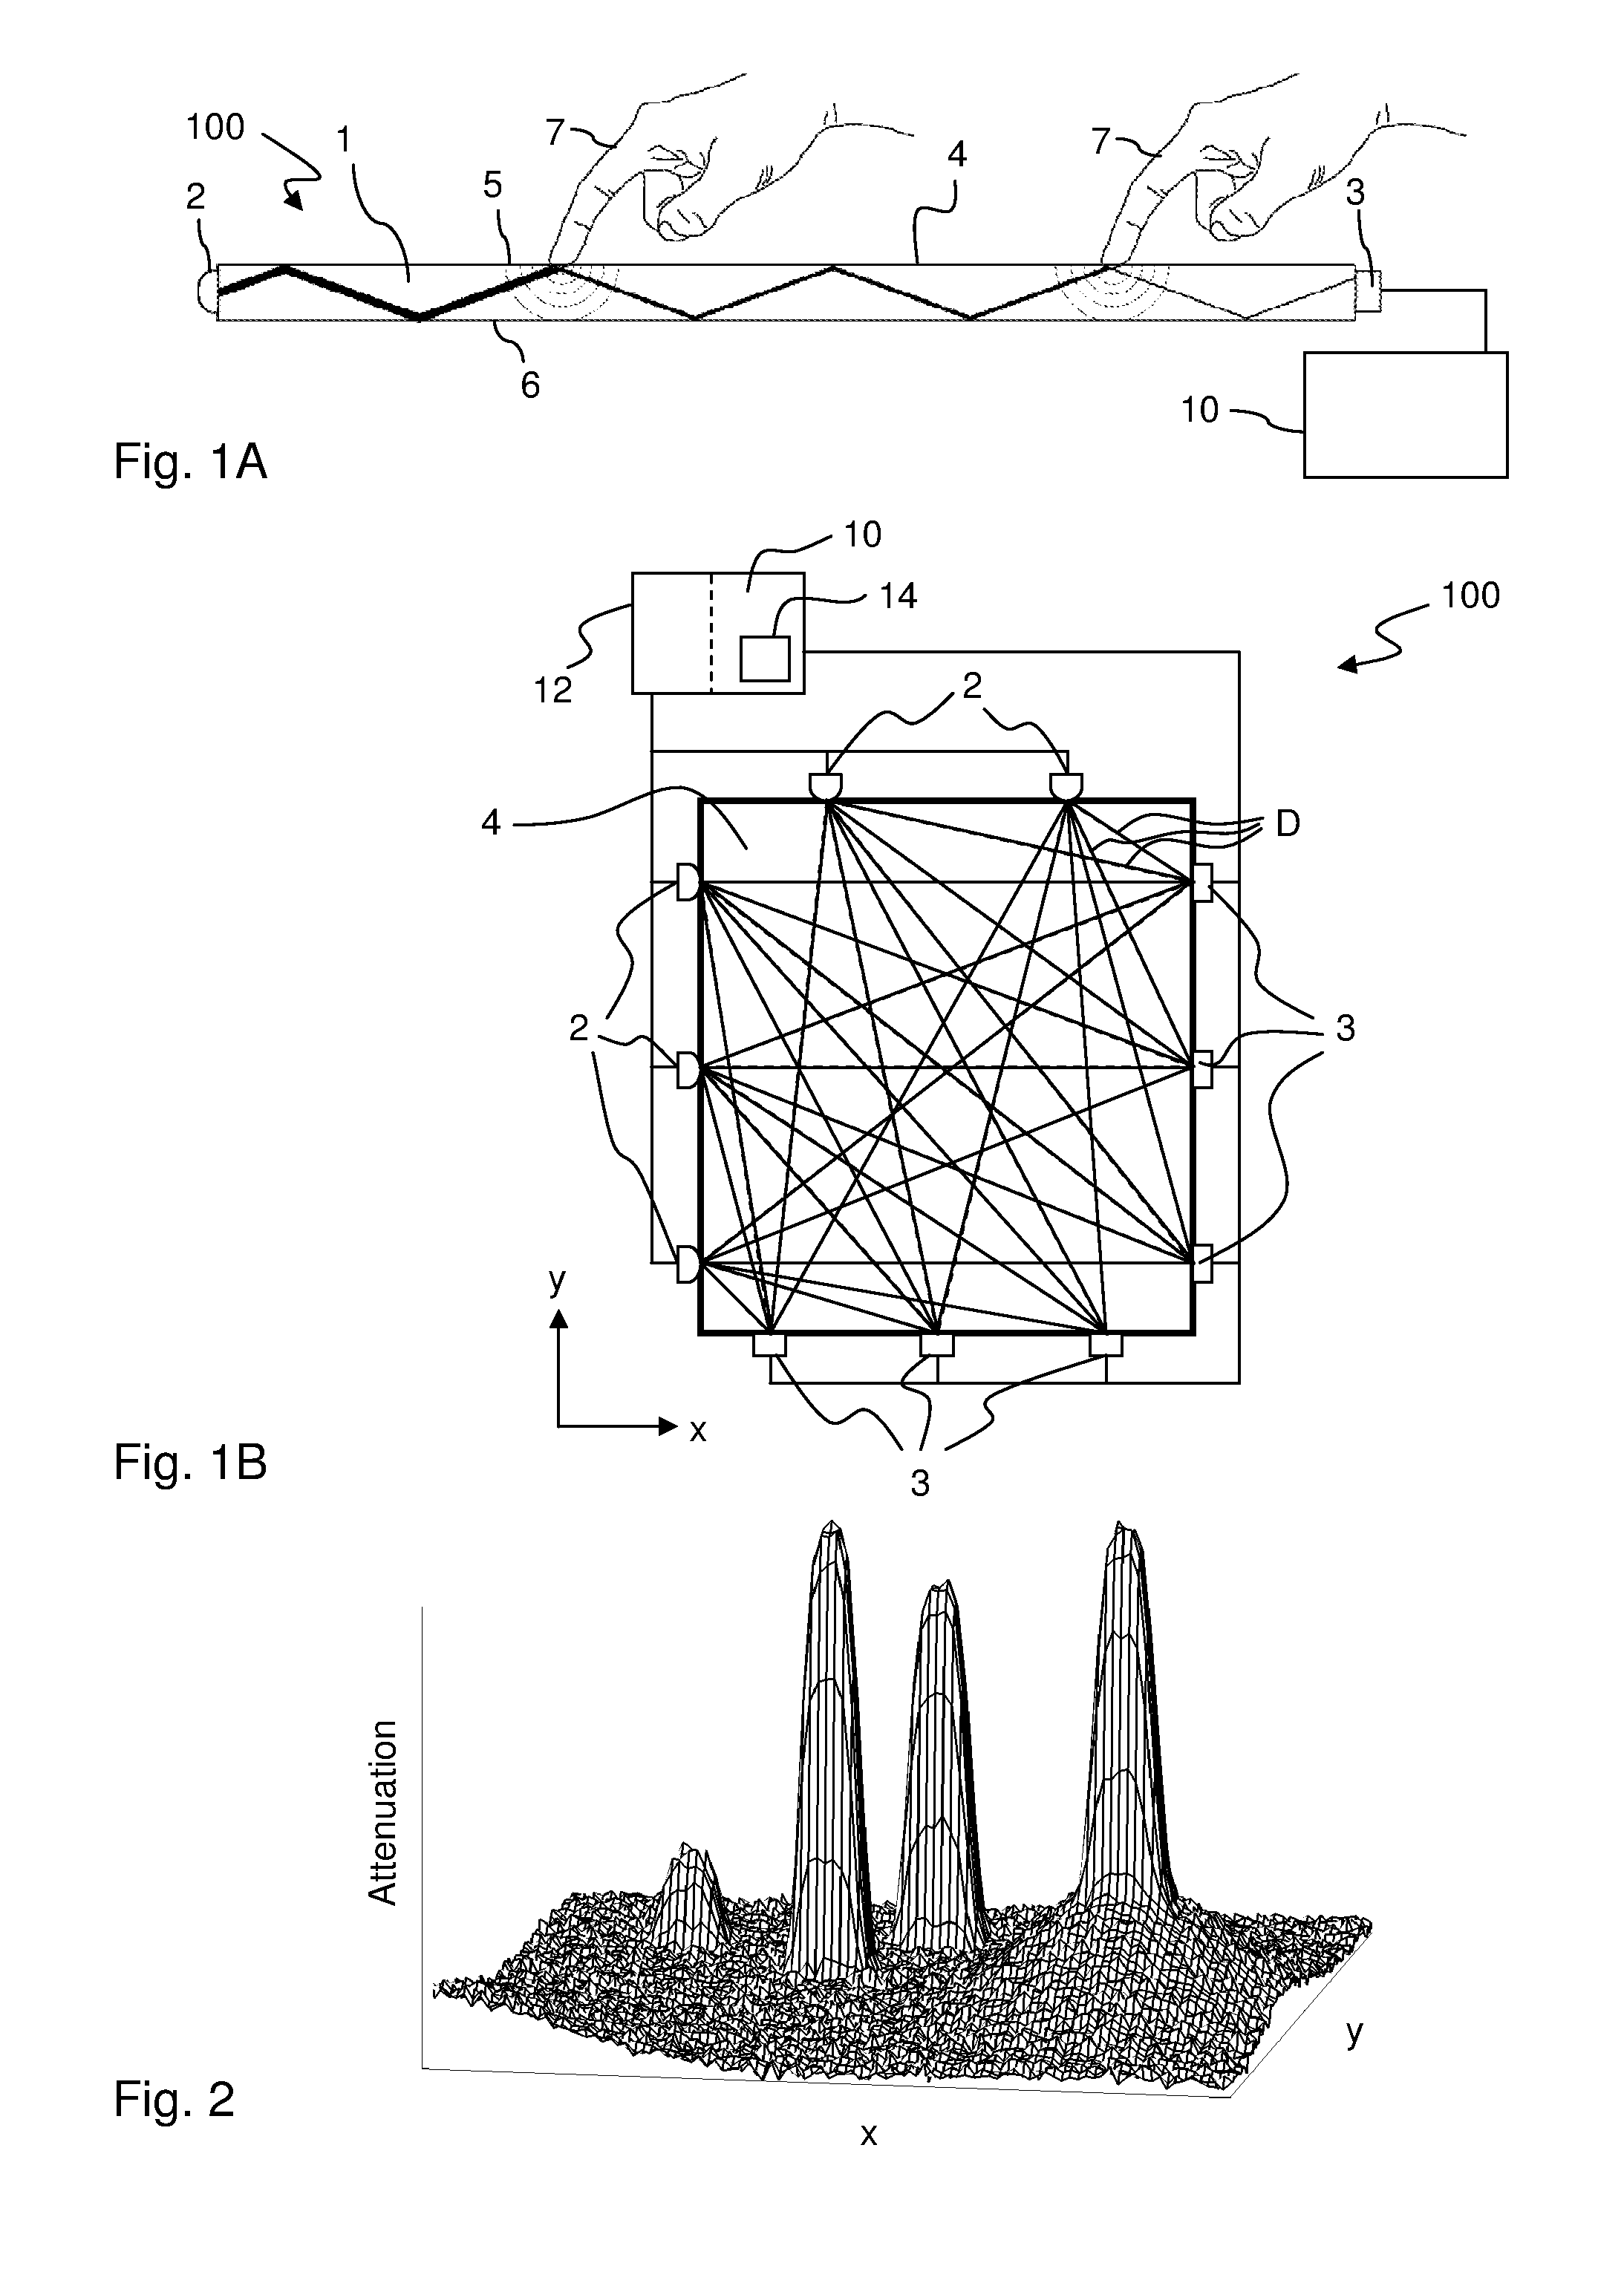 Touch-sensitive apparatus with improved spatial resolution